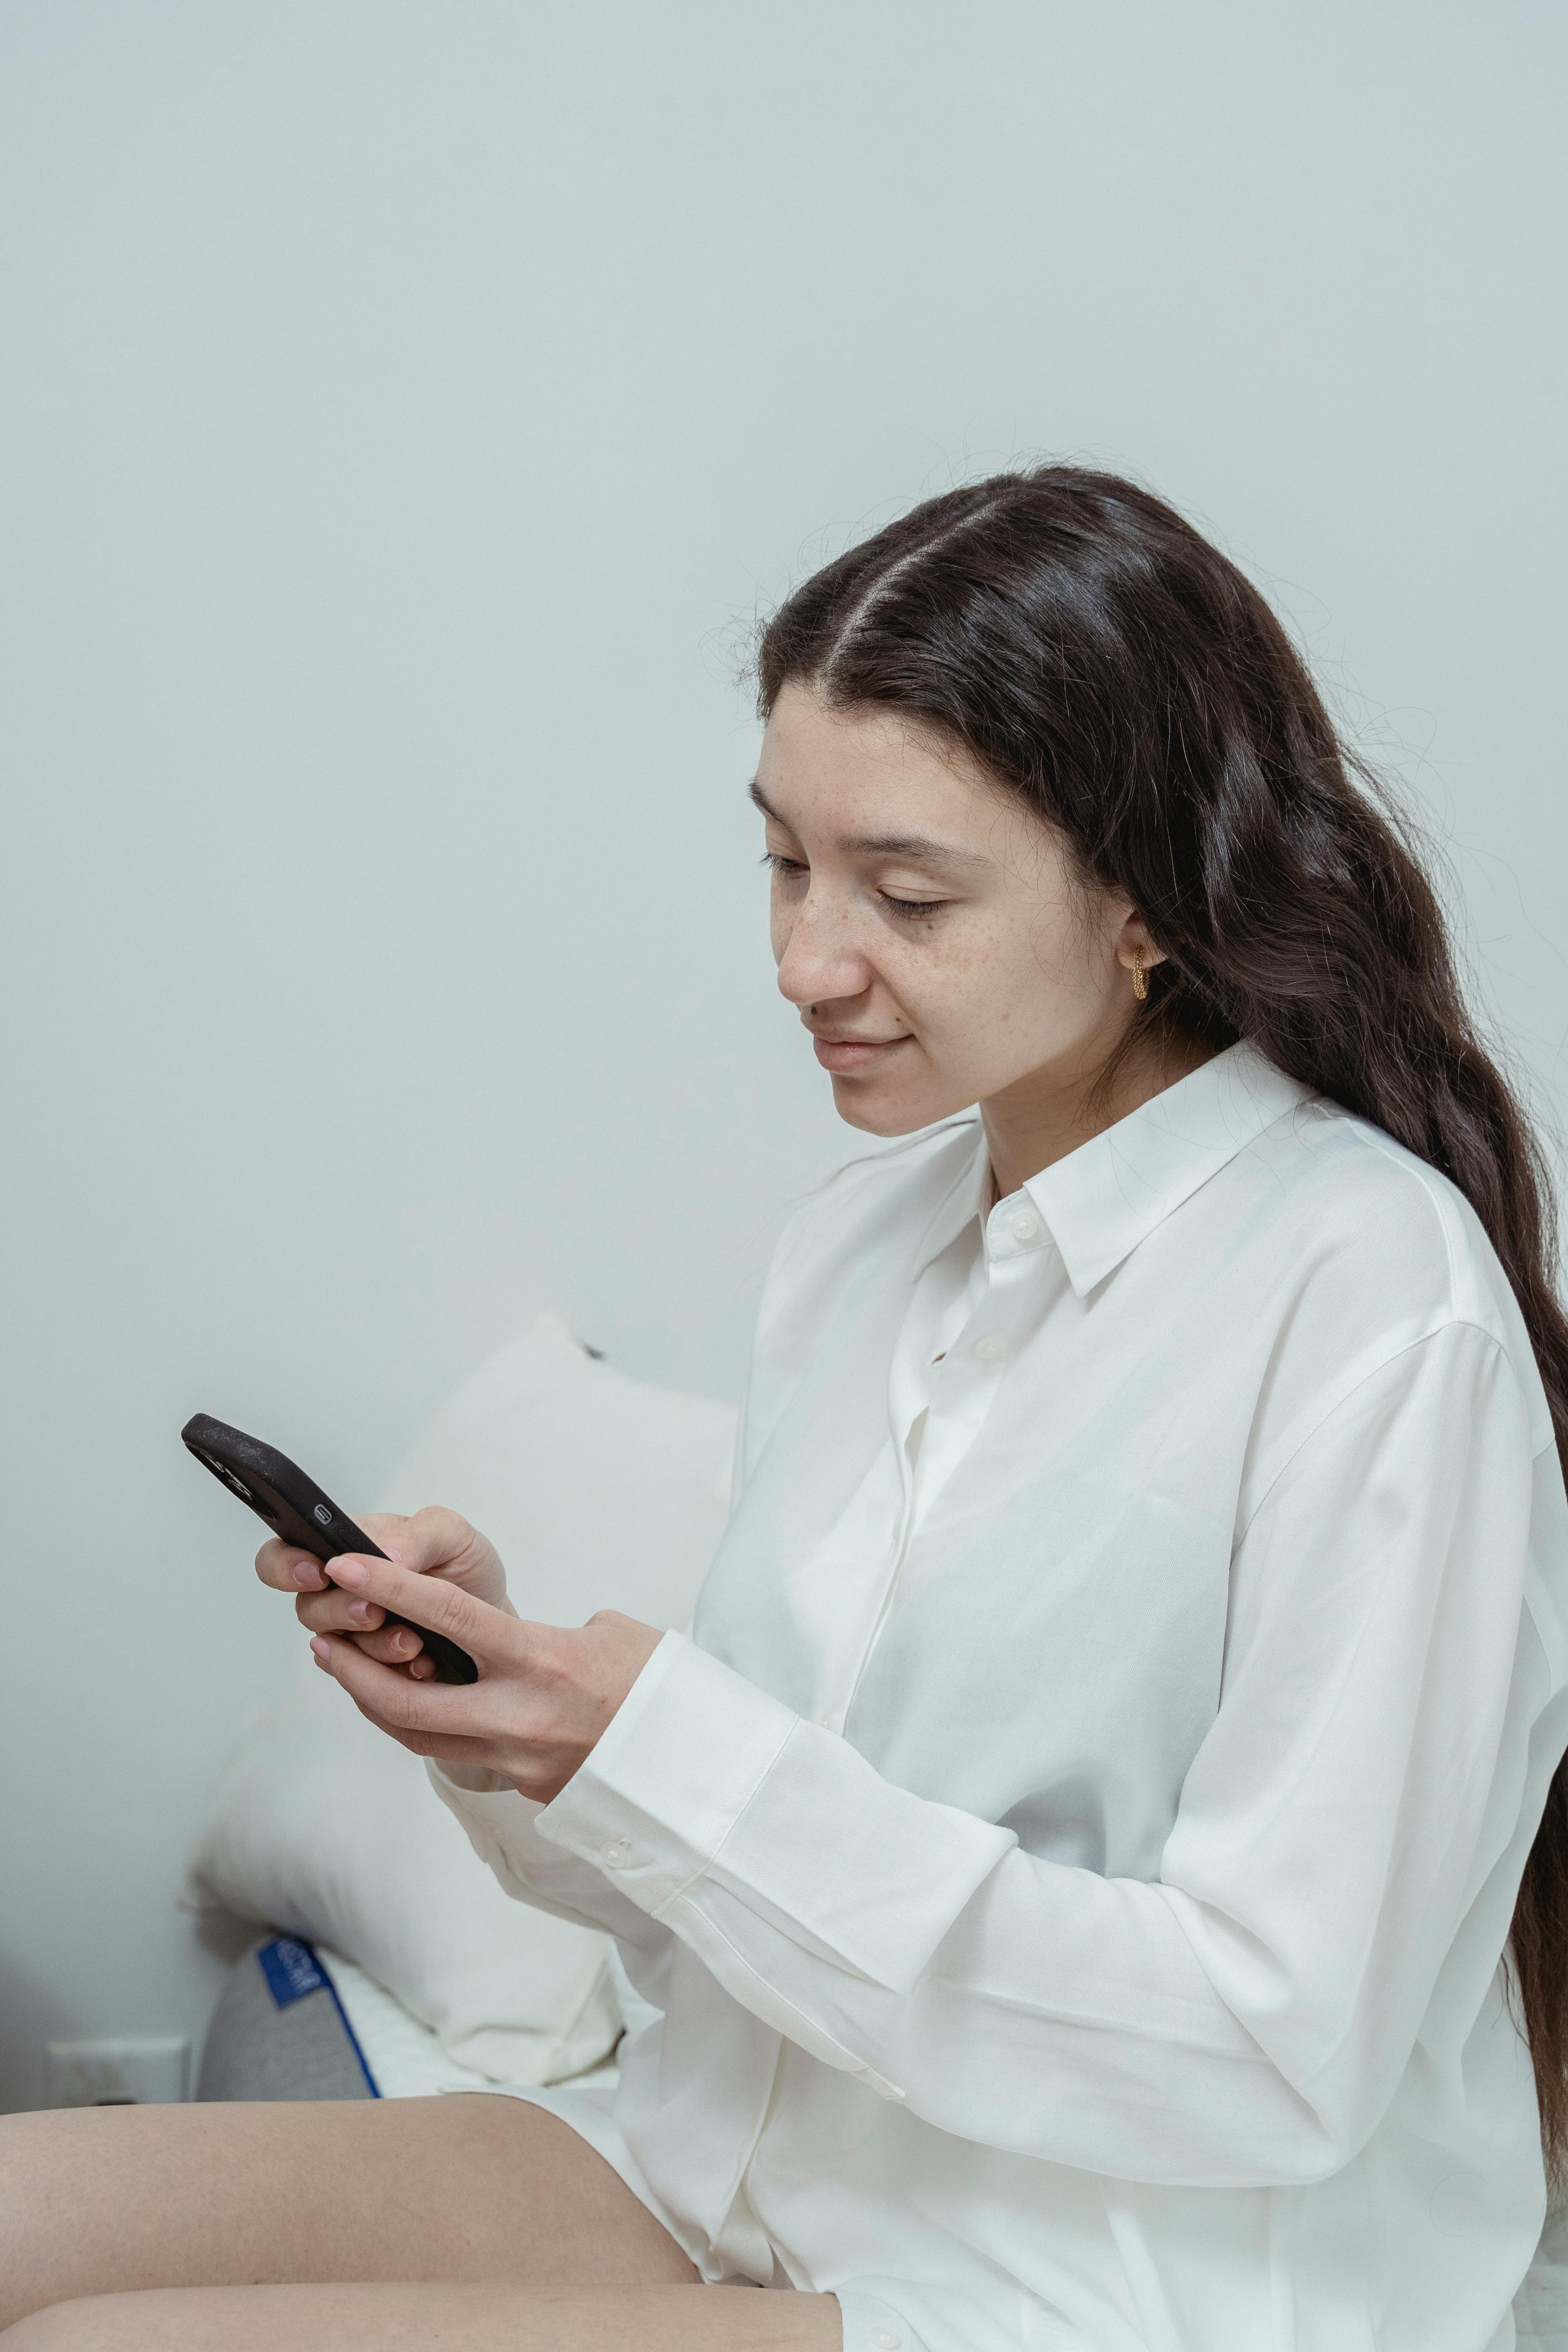 portrait of a woman using a smart phone